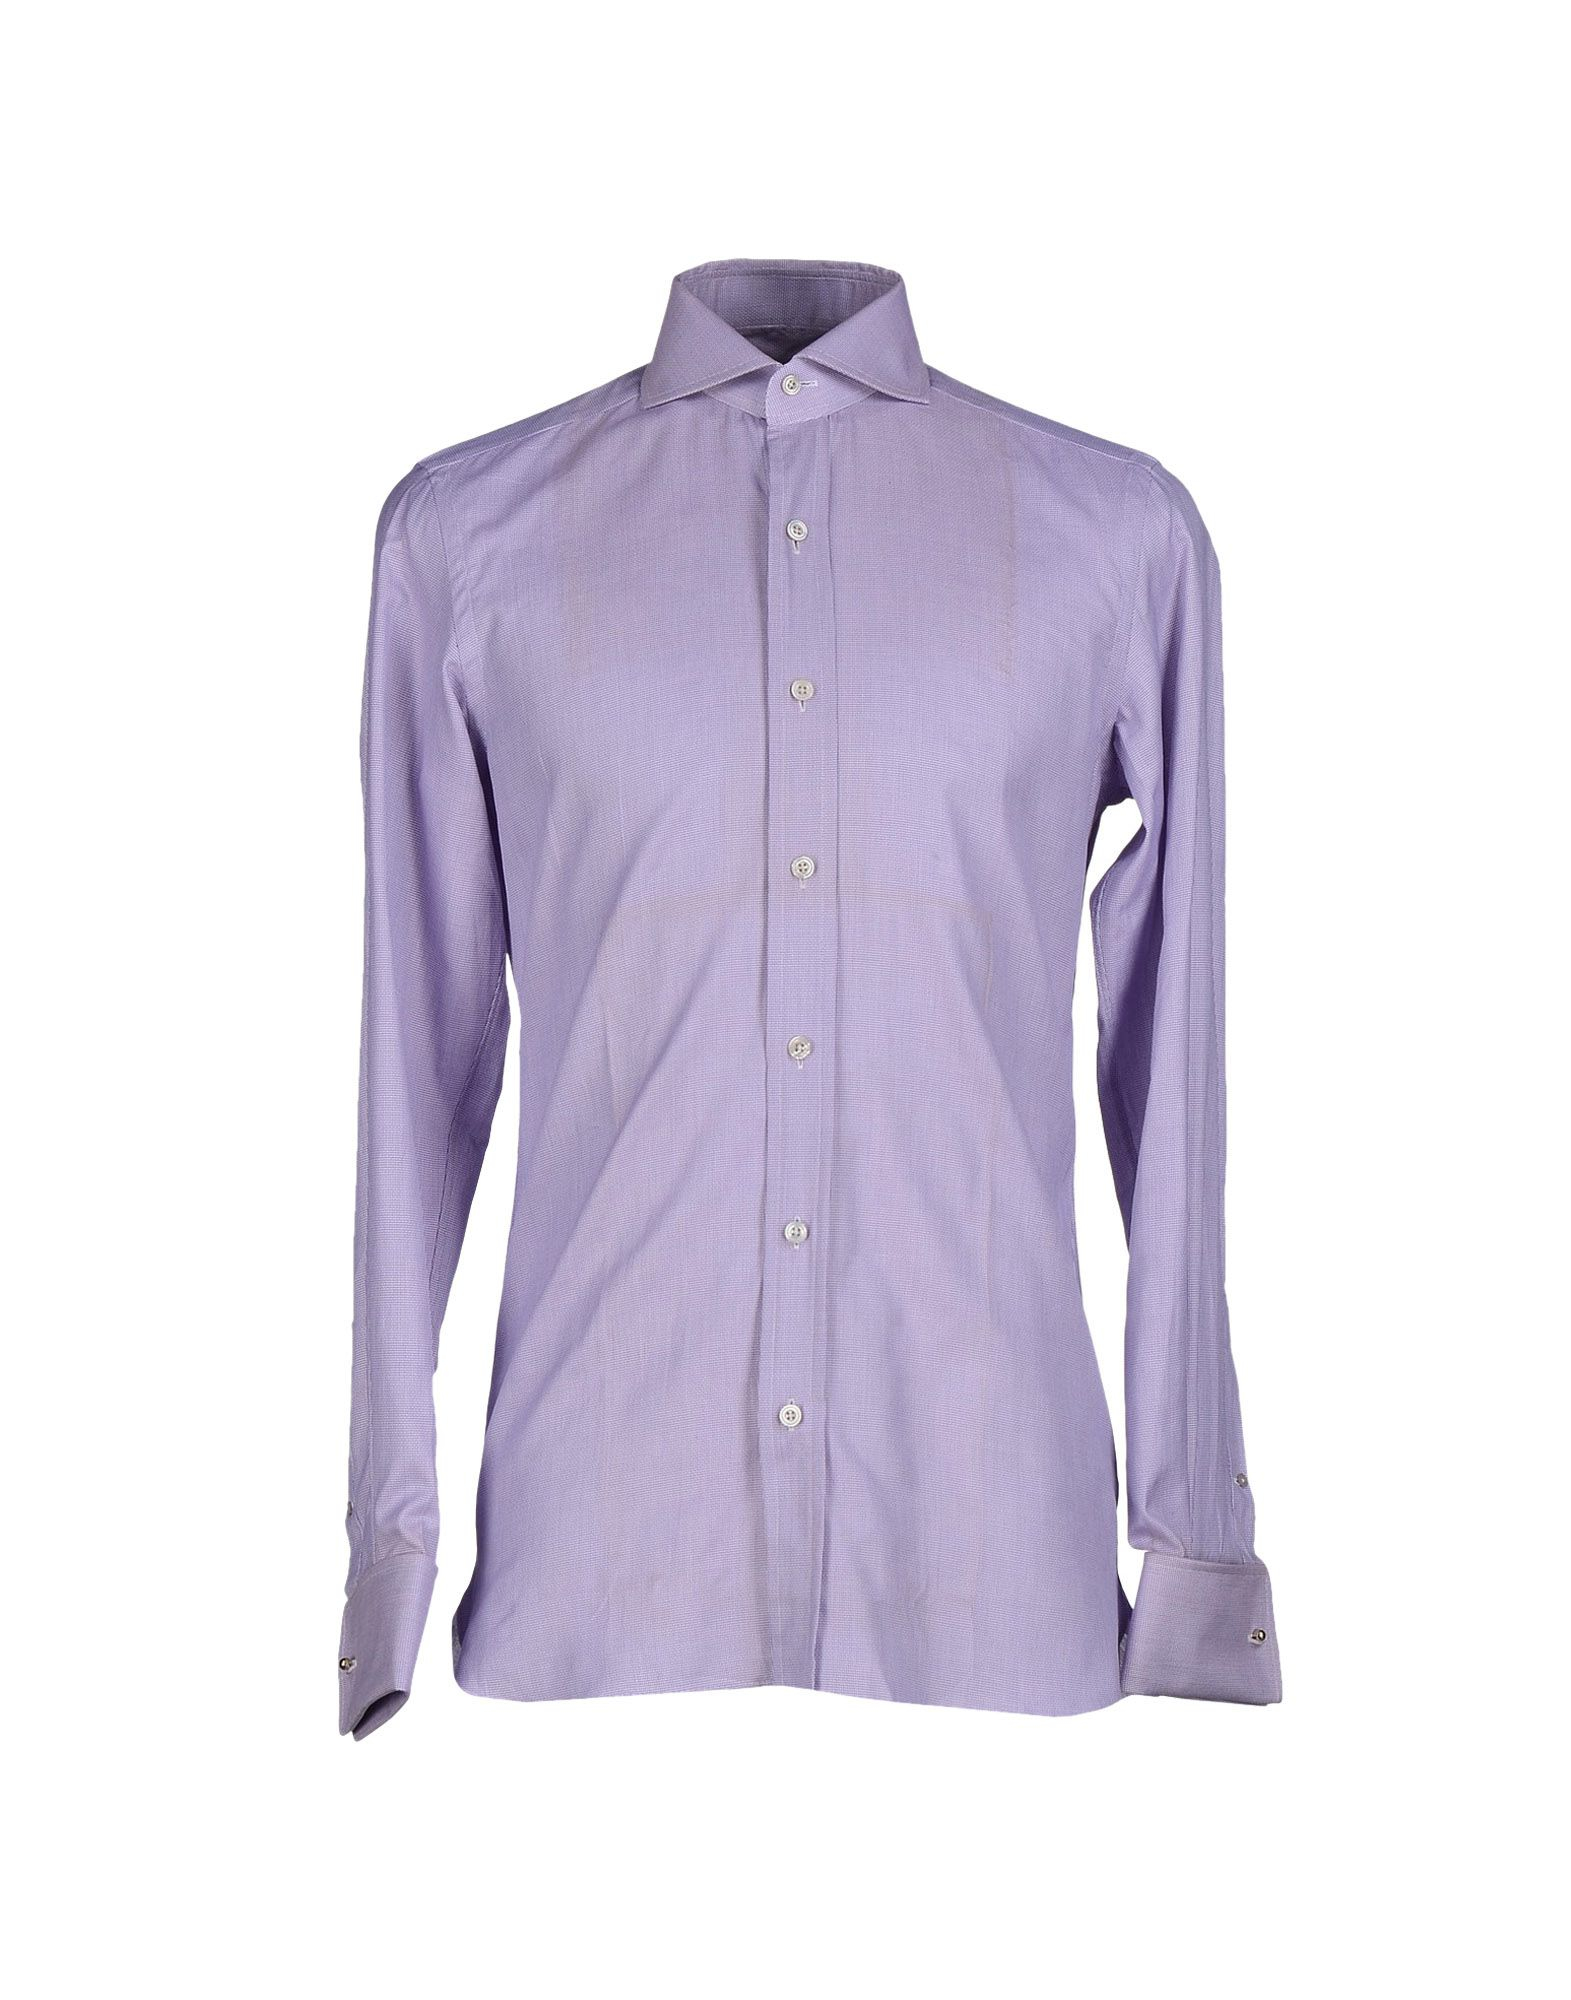 Lyst - Tom Ford Shirt in Purple for Men